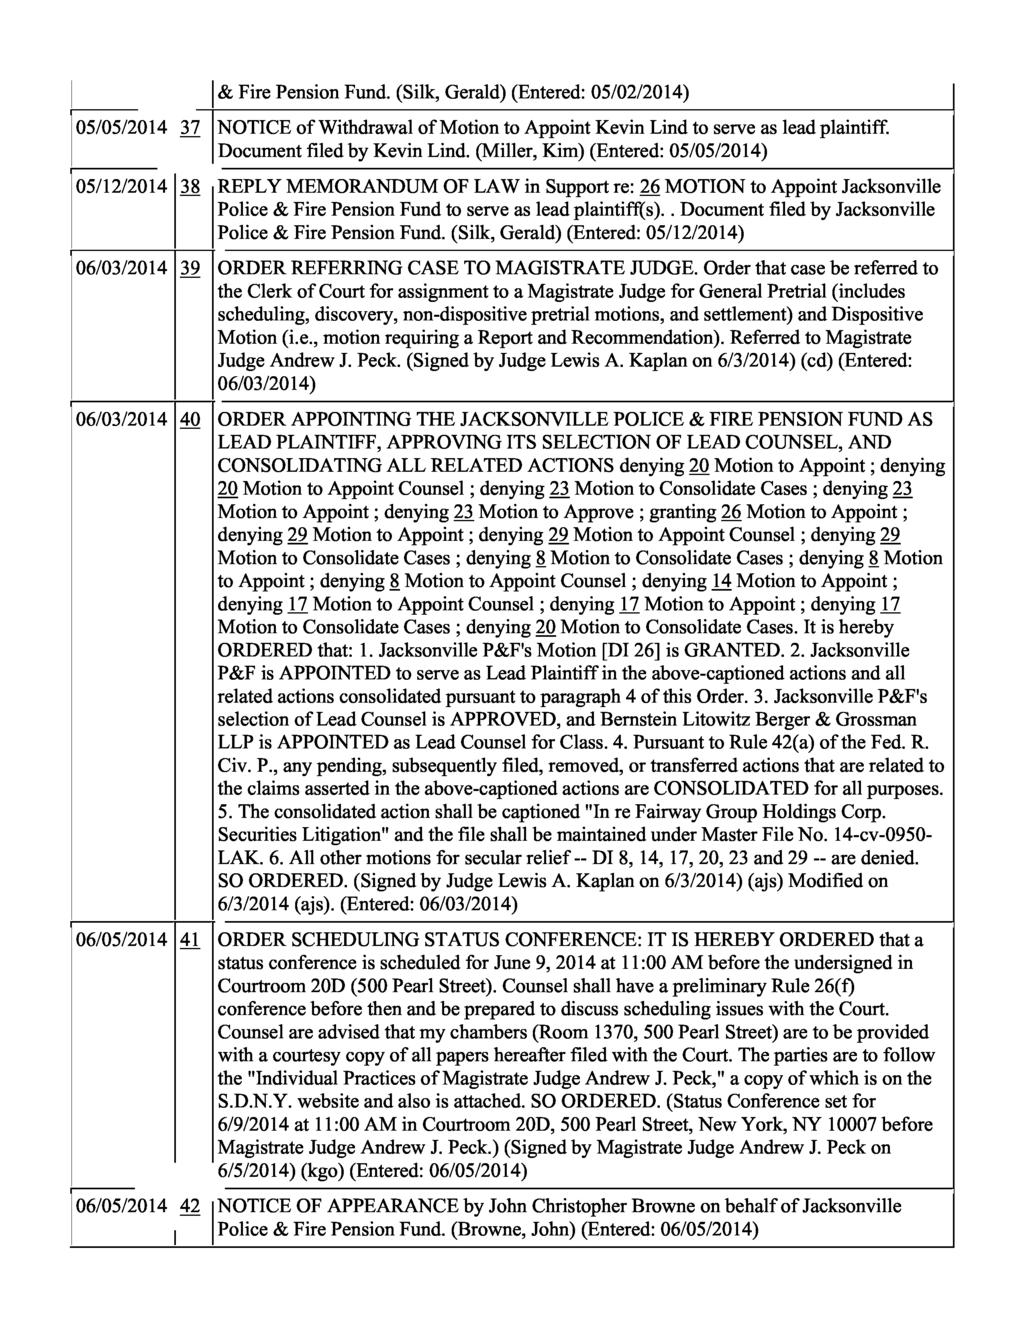 & Fire Pension Fund. (Silk, Gerald) (Entered: 05/02/2014) 05/05/2014 37 NOTICE of Withdrawal of Motion to Appoint Kevin Lind to serve as lead plaintiff. Document filed by Kevin Lind.